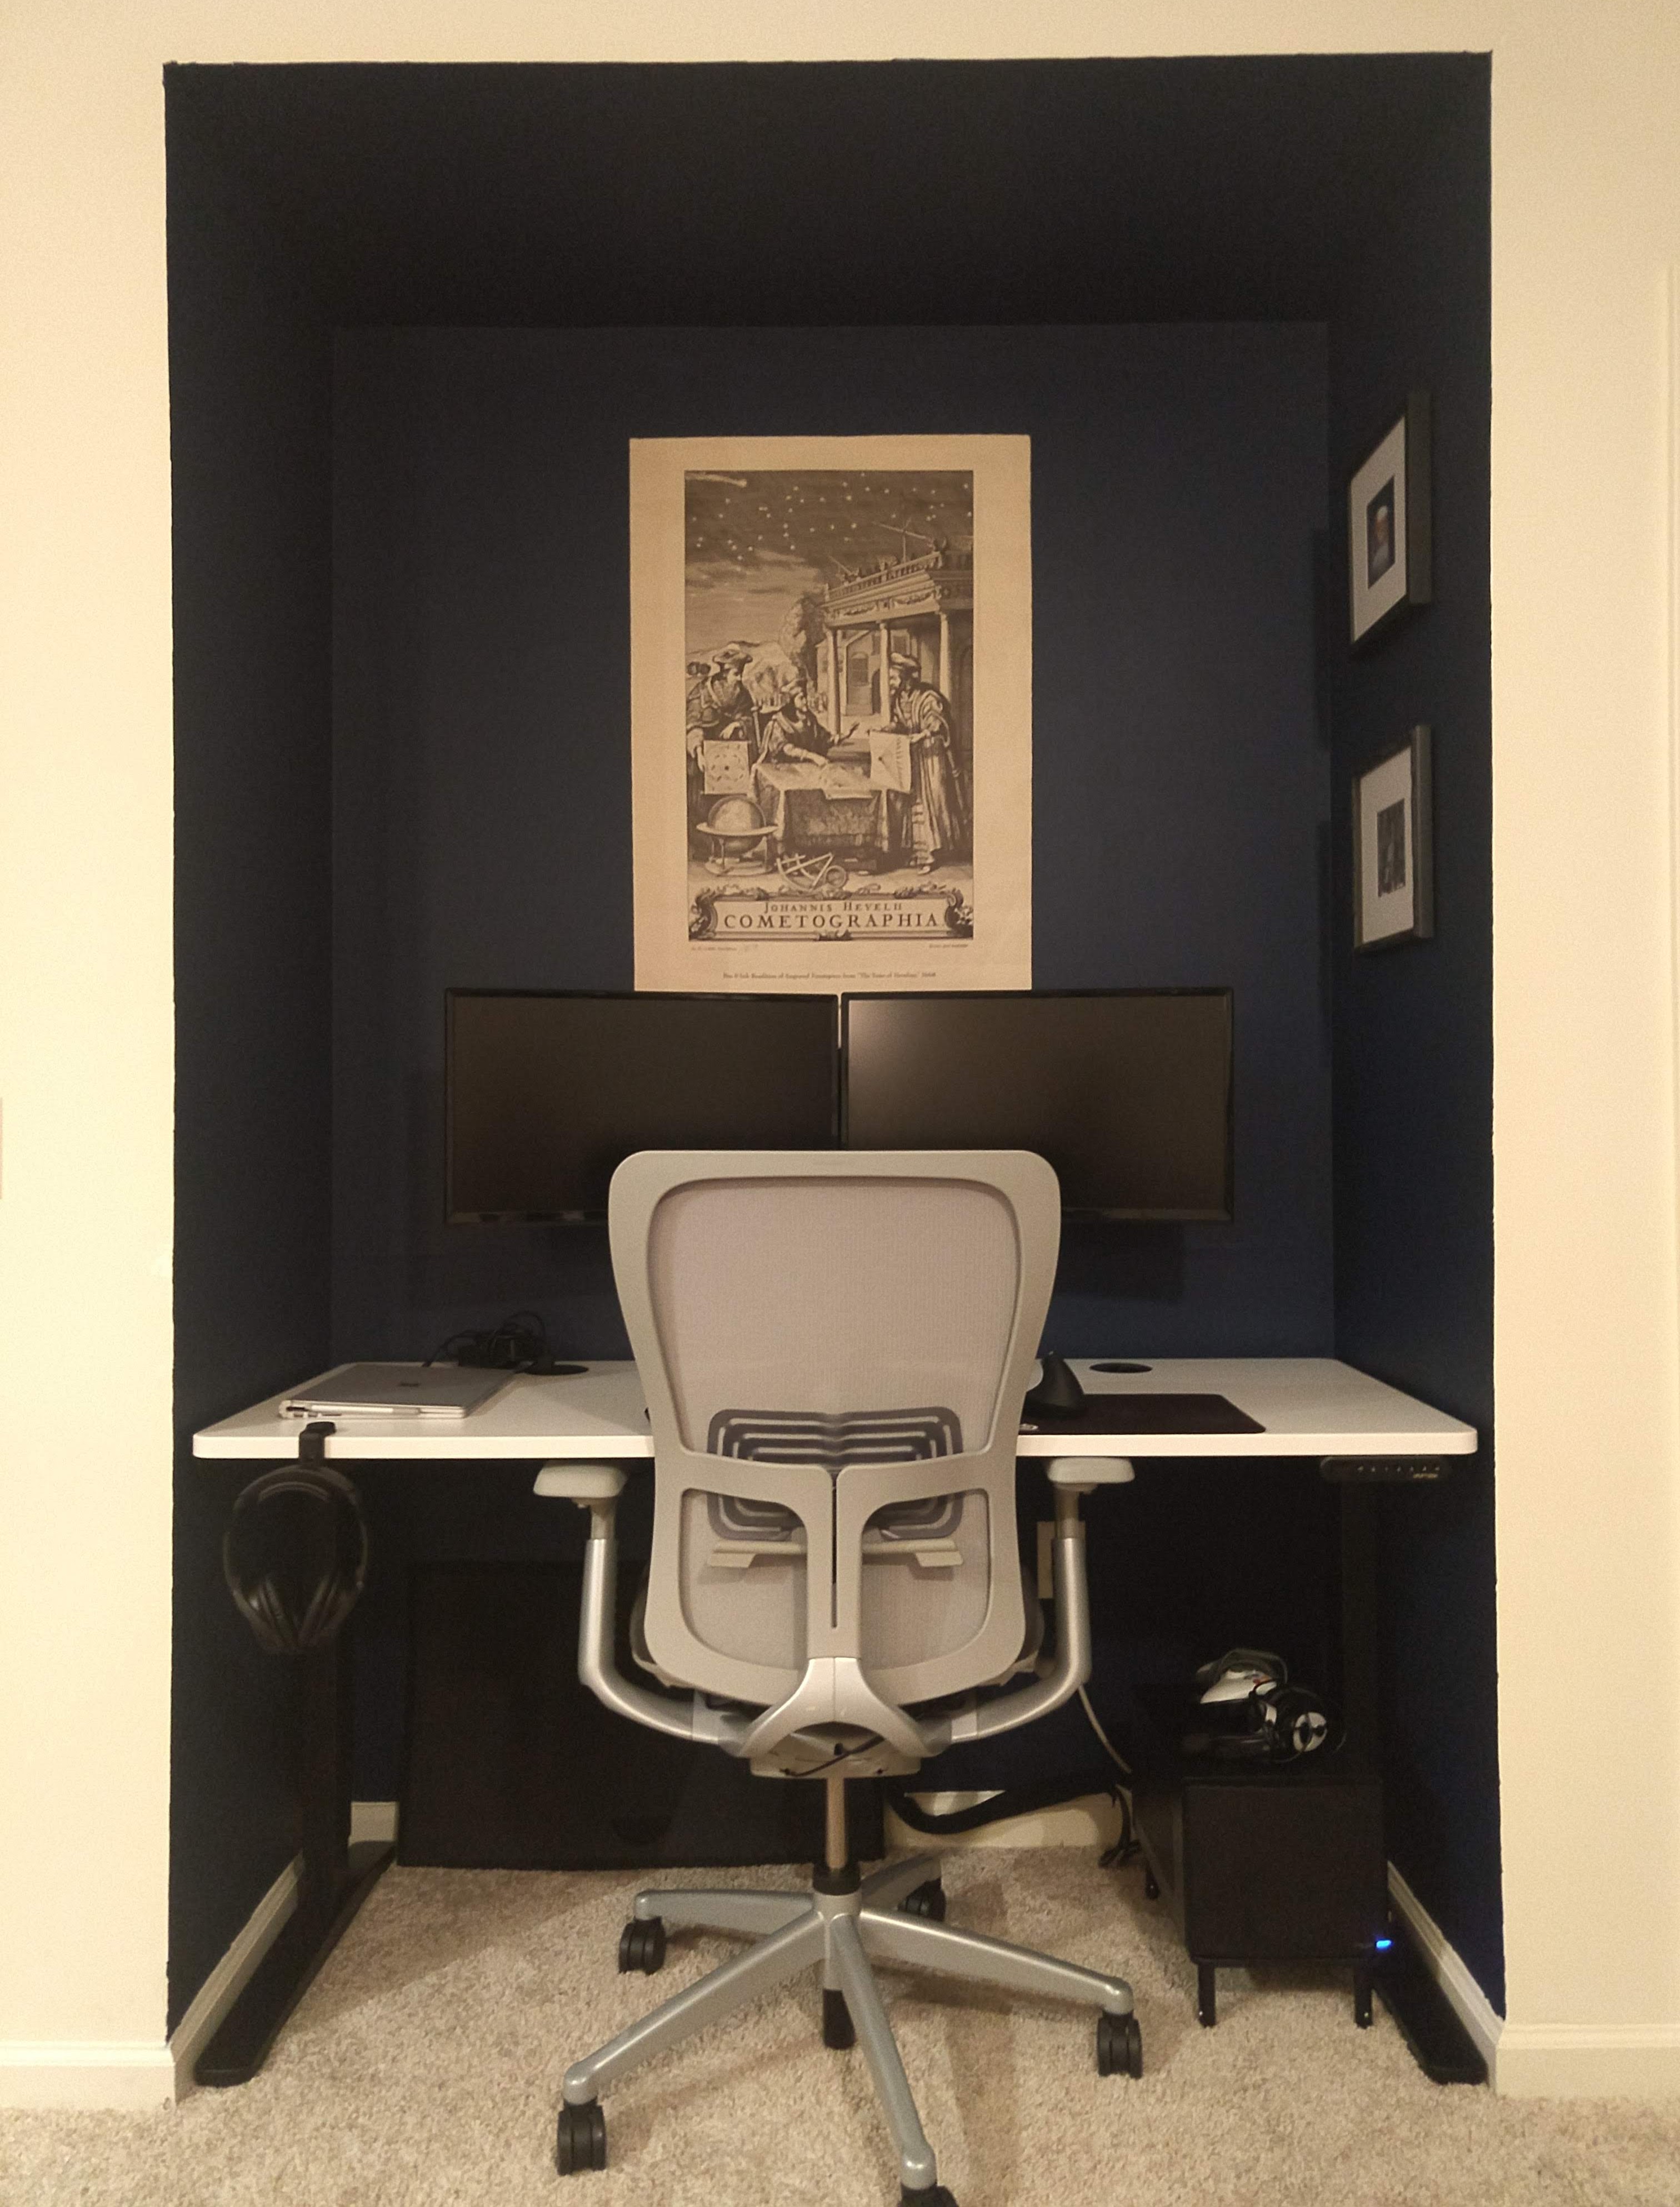 Photo of the final setup. A white desk surmounted by two monitors sits nestled in an alcove. The alcove is painted navy blue and has a poster and several framed photos hung up. A computer chair sits with its base tucked under the desk. A workstation sits on a platform above the floor on the bottom right.